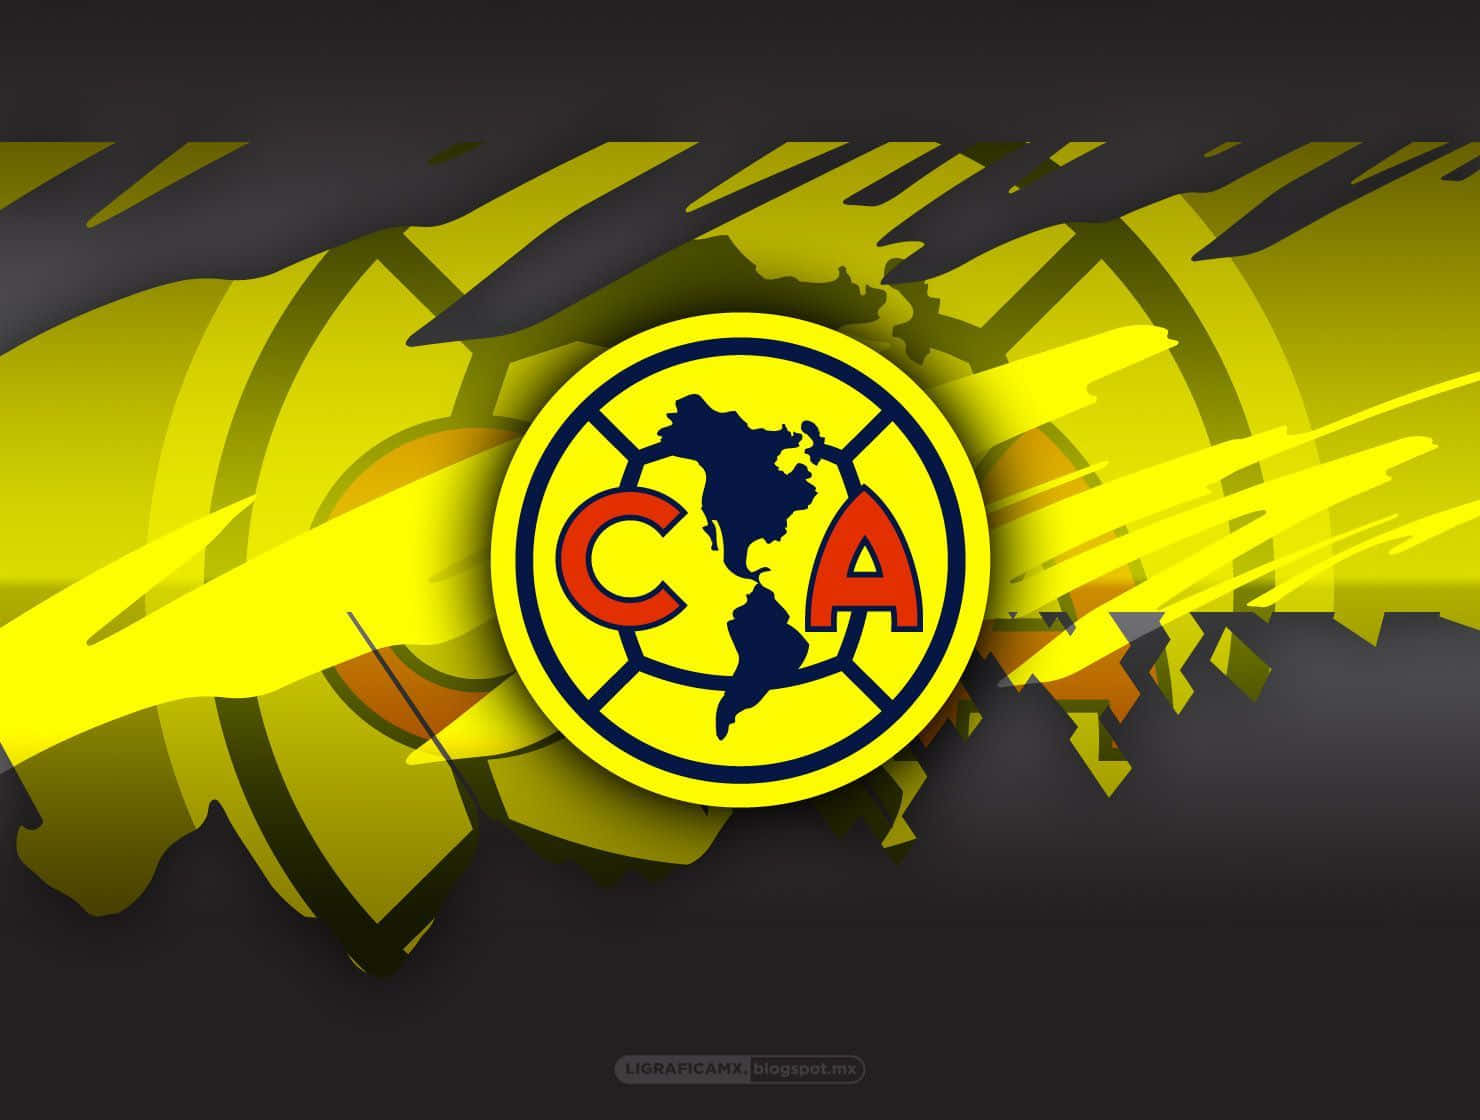 For the faithful fanbase of Club America, no void can be too vast to be filled by passion. Wallpaper